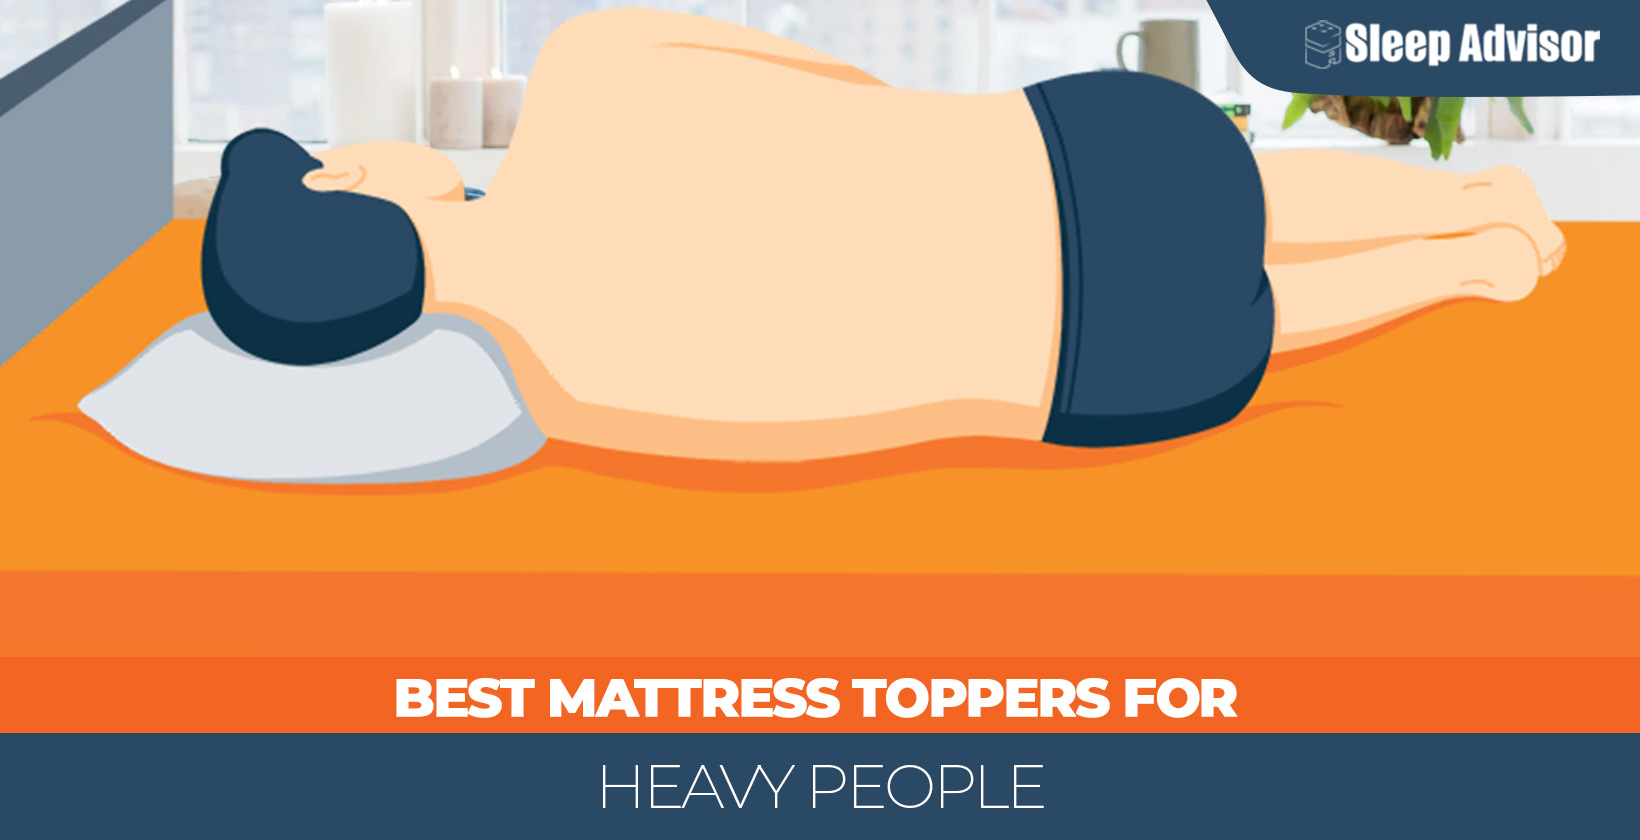 Best Mattress Toppers for heavy people